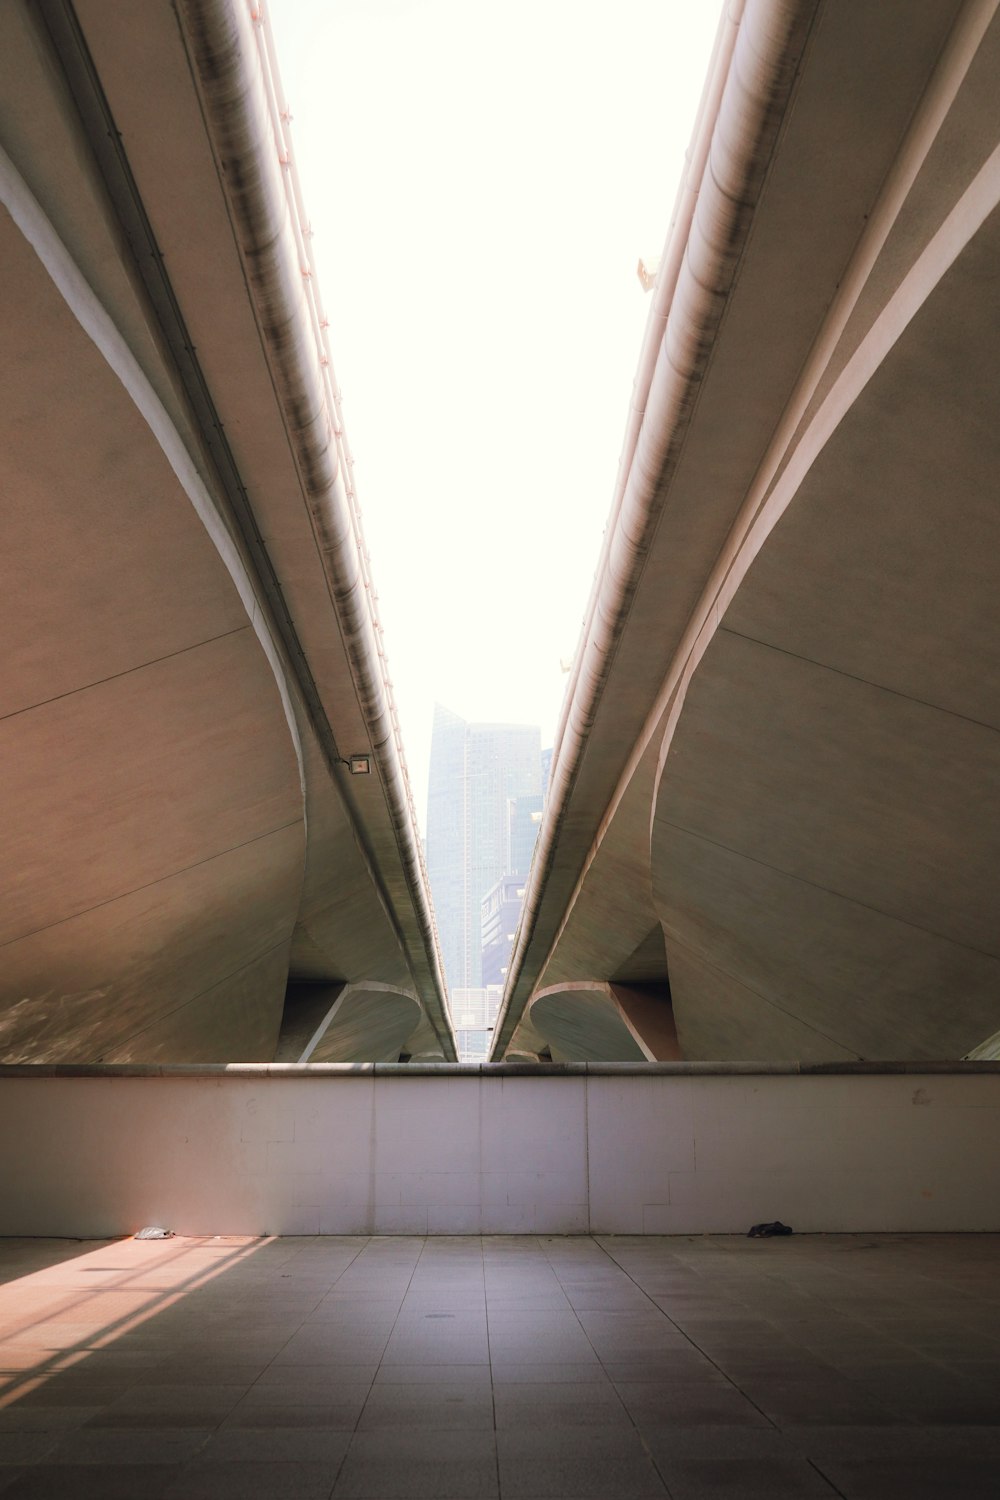 a view of the underside of a bridge from the ground